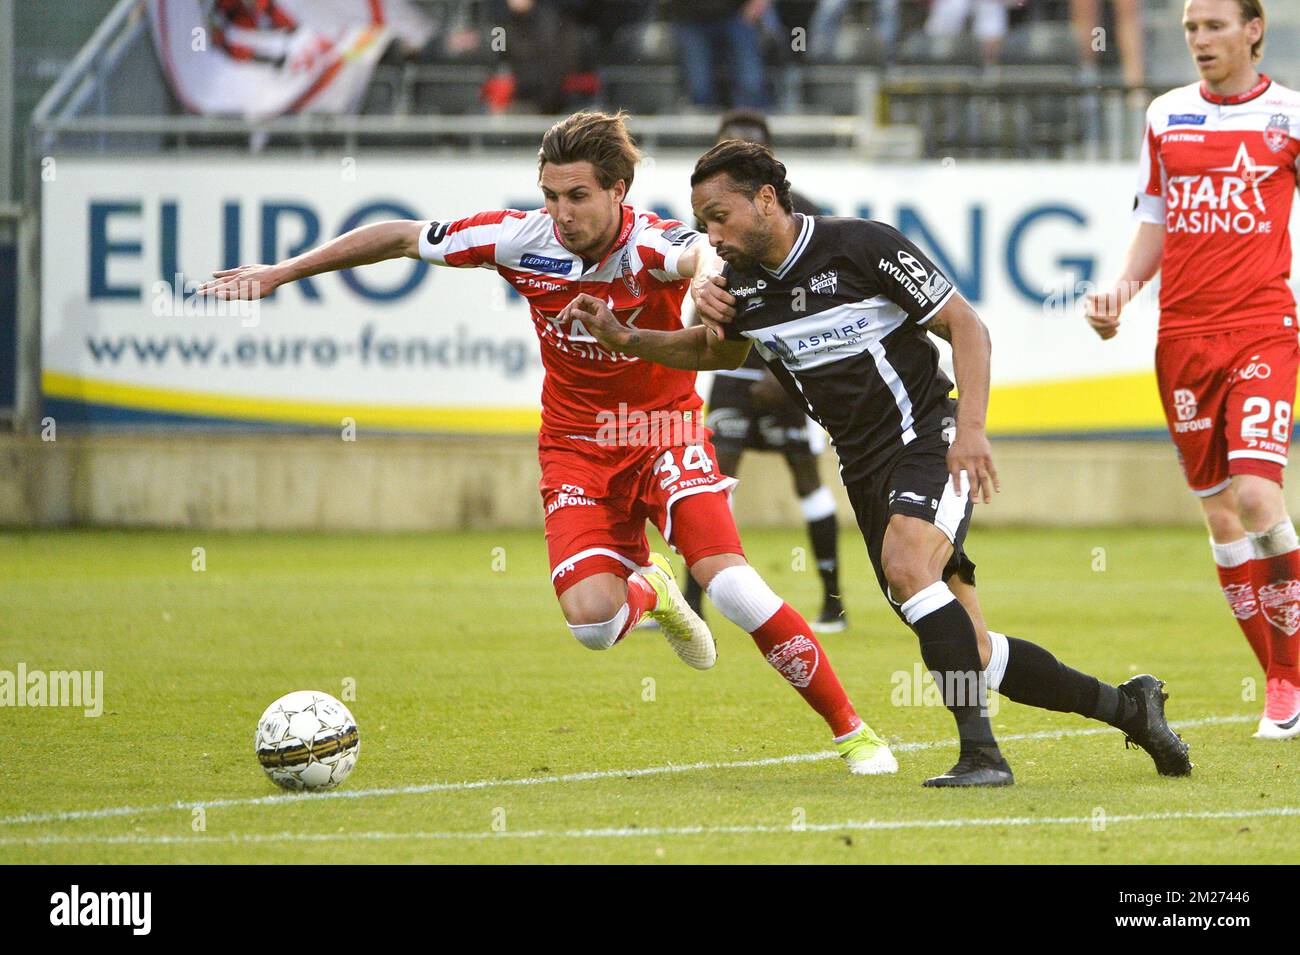 Mouscron's Stefan Simic and Eupen's Jeffren Issac Suarez Bermudez pictured during the Jupiler Pro League match between KAS Eupen and Royal Excel Mouscron, in Eupen, Wednesday 17 May 2017, on day 9 (out of 10) of the Play-off 2B of the Belgian soccer championship. BELGA PHOTO NICOLAS LAMBERT Stock Photo